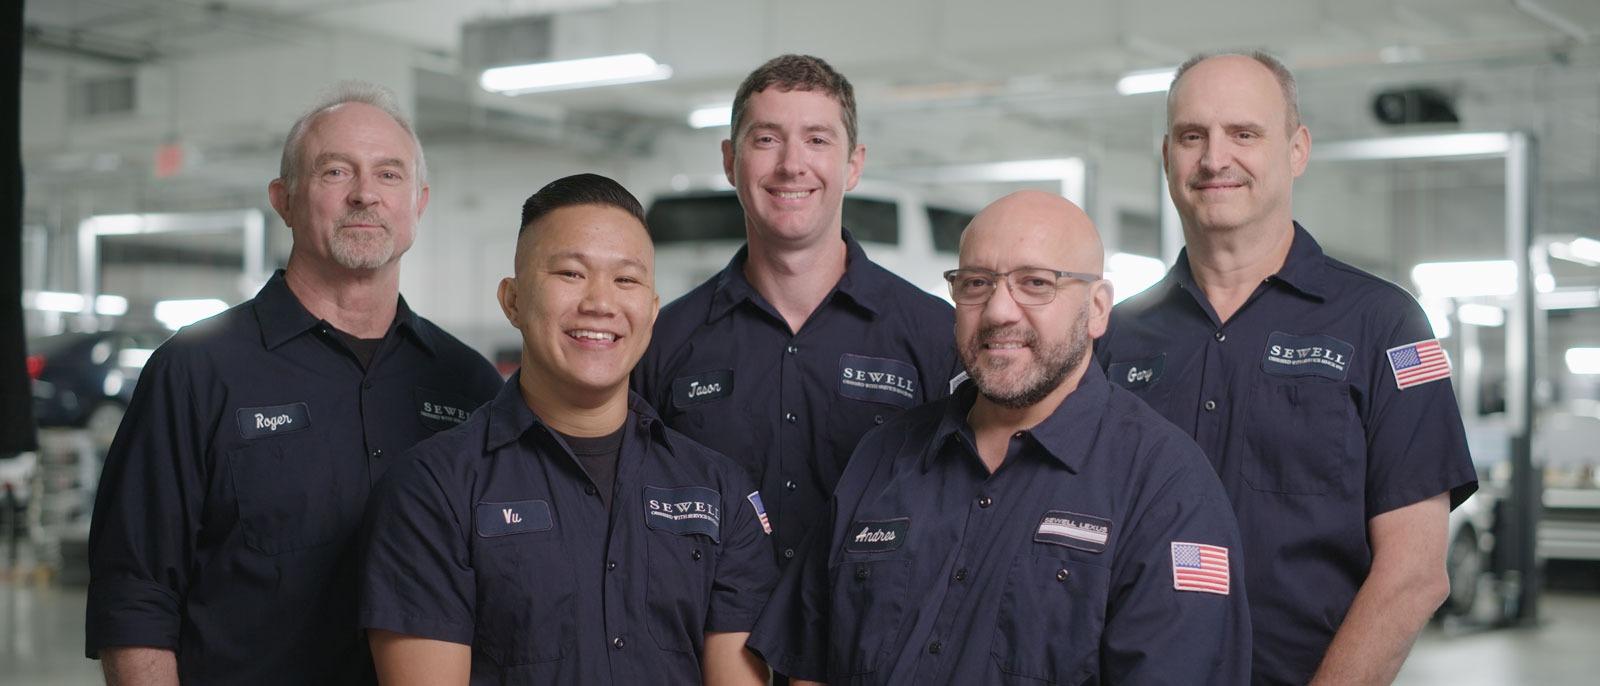 Group shot of Sewell Experienced Technicians